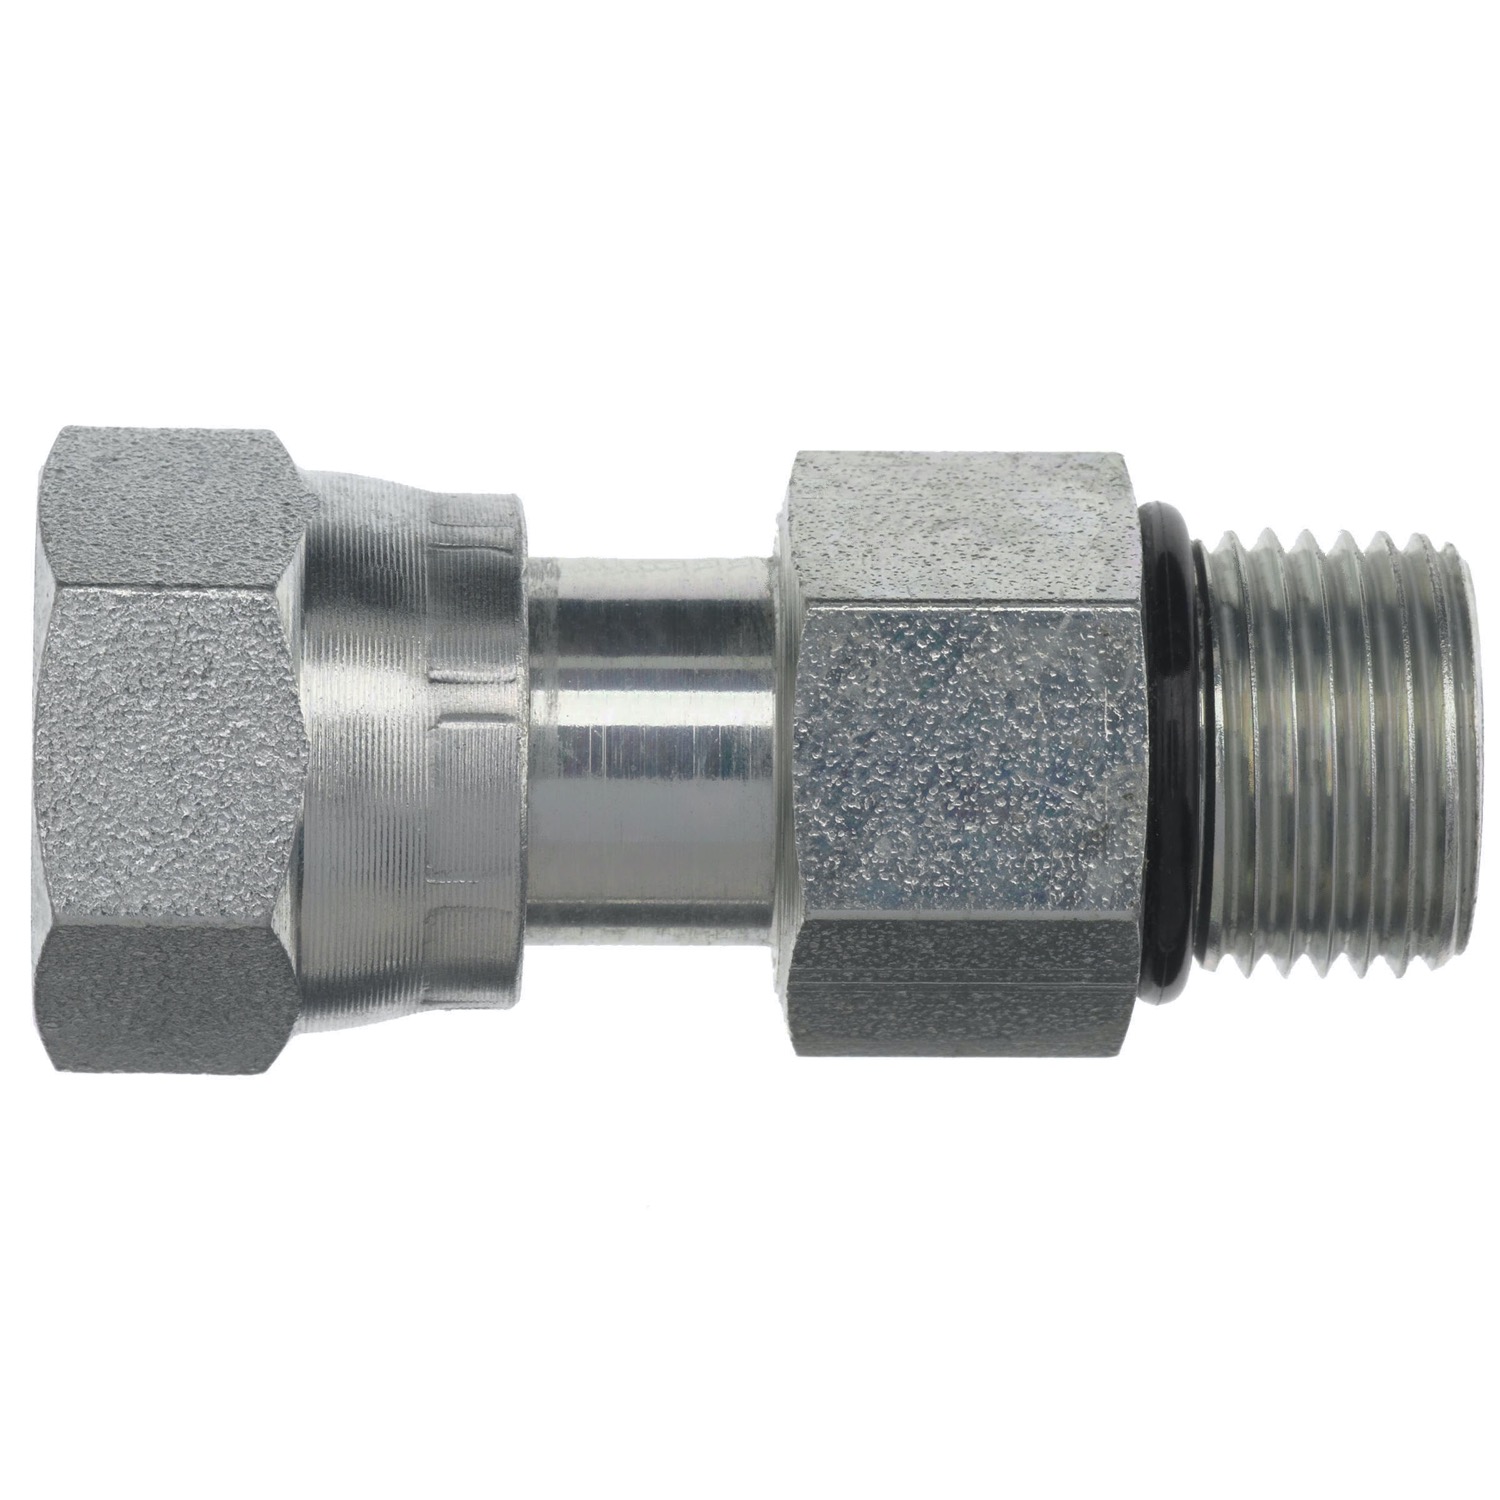 Hydraulic Hose Adapters - Straight Fitting, FS6540 Series